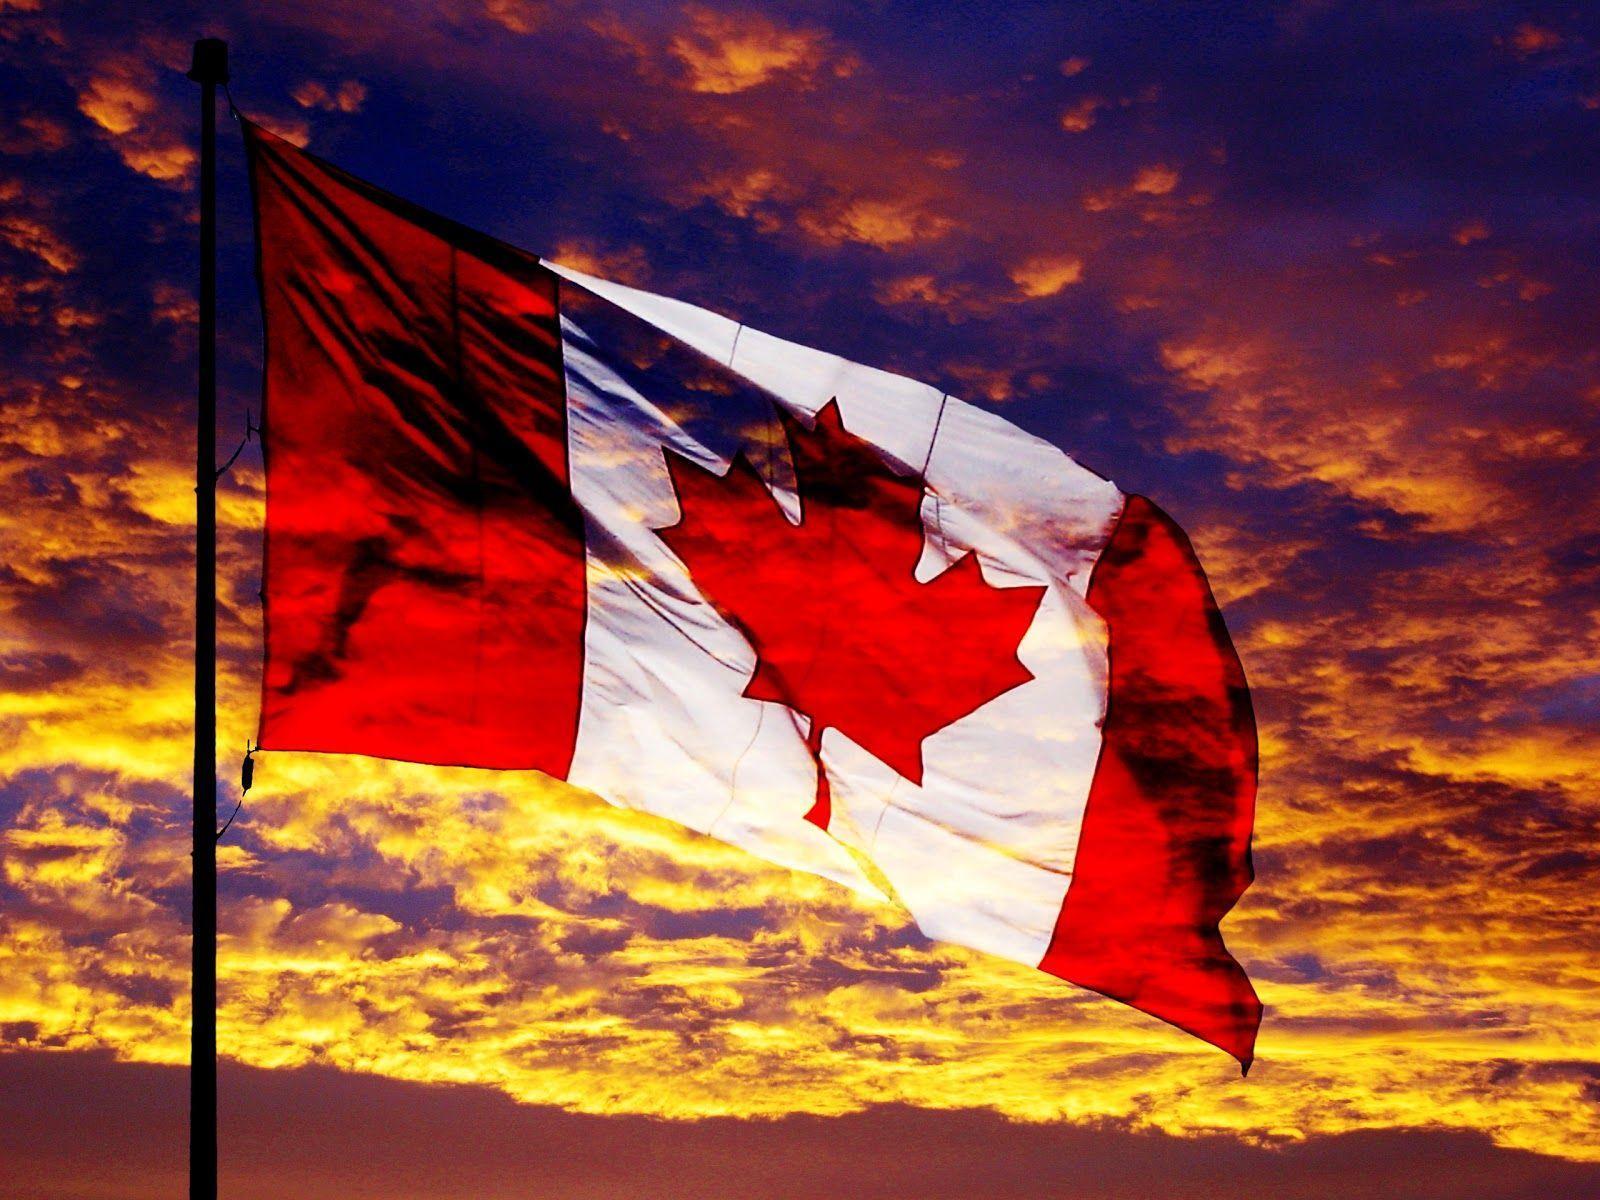 Central Wallpaper: Awesome Canada Flag Designs HD Wallpaper